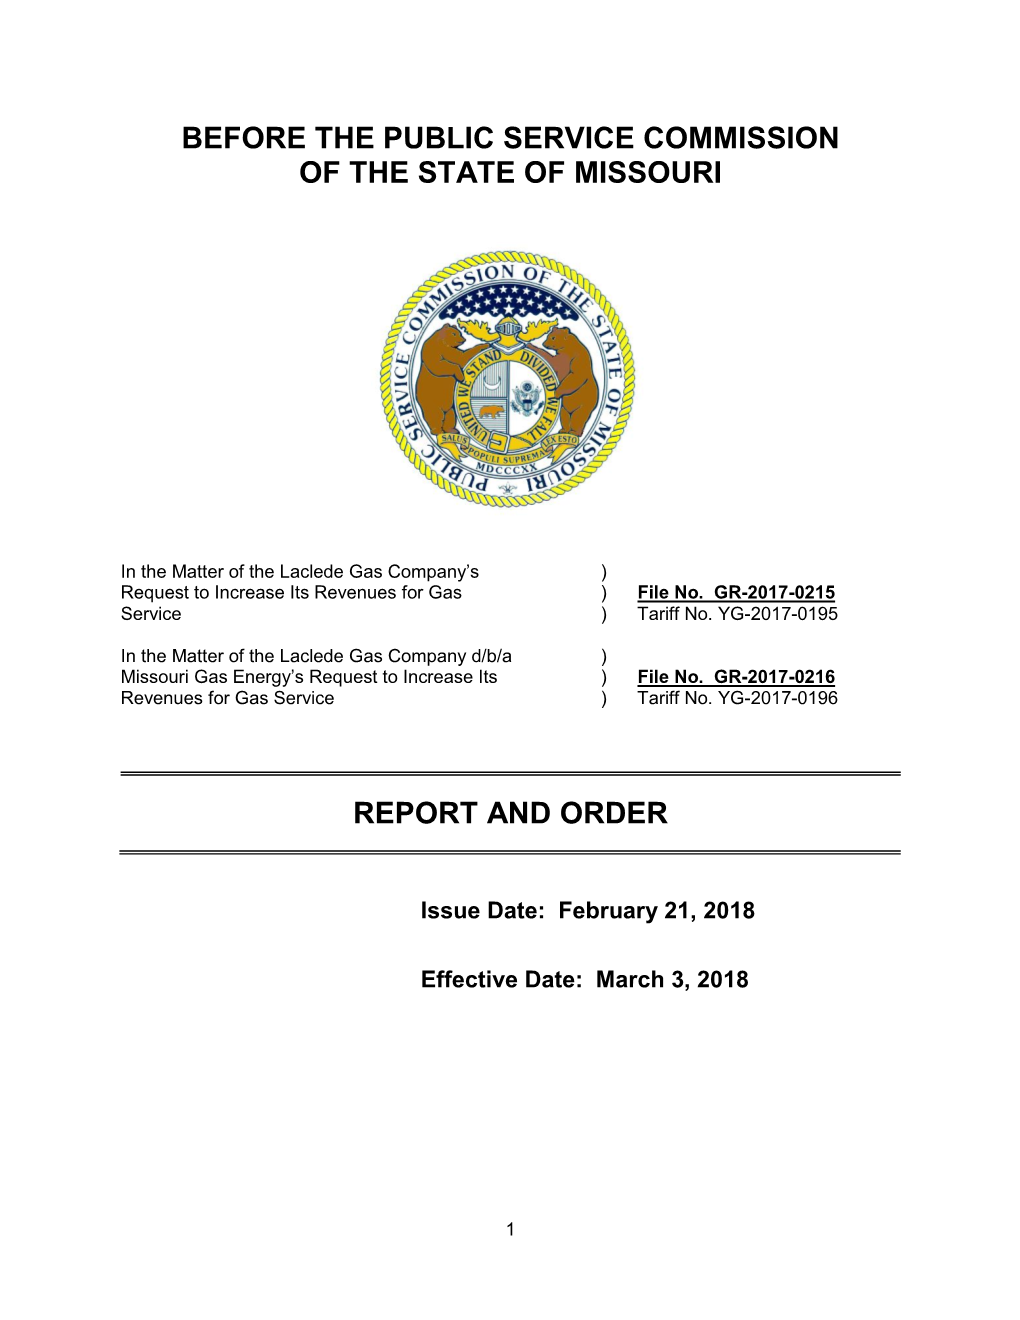 Before the Public Service Commission of the State of Missouri